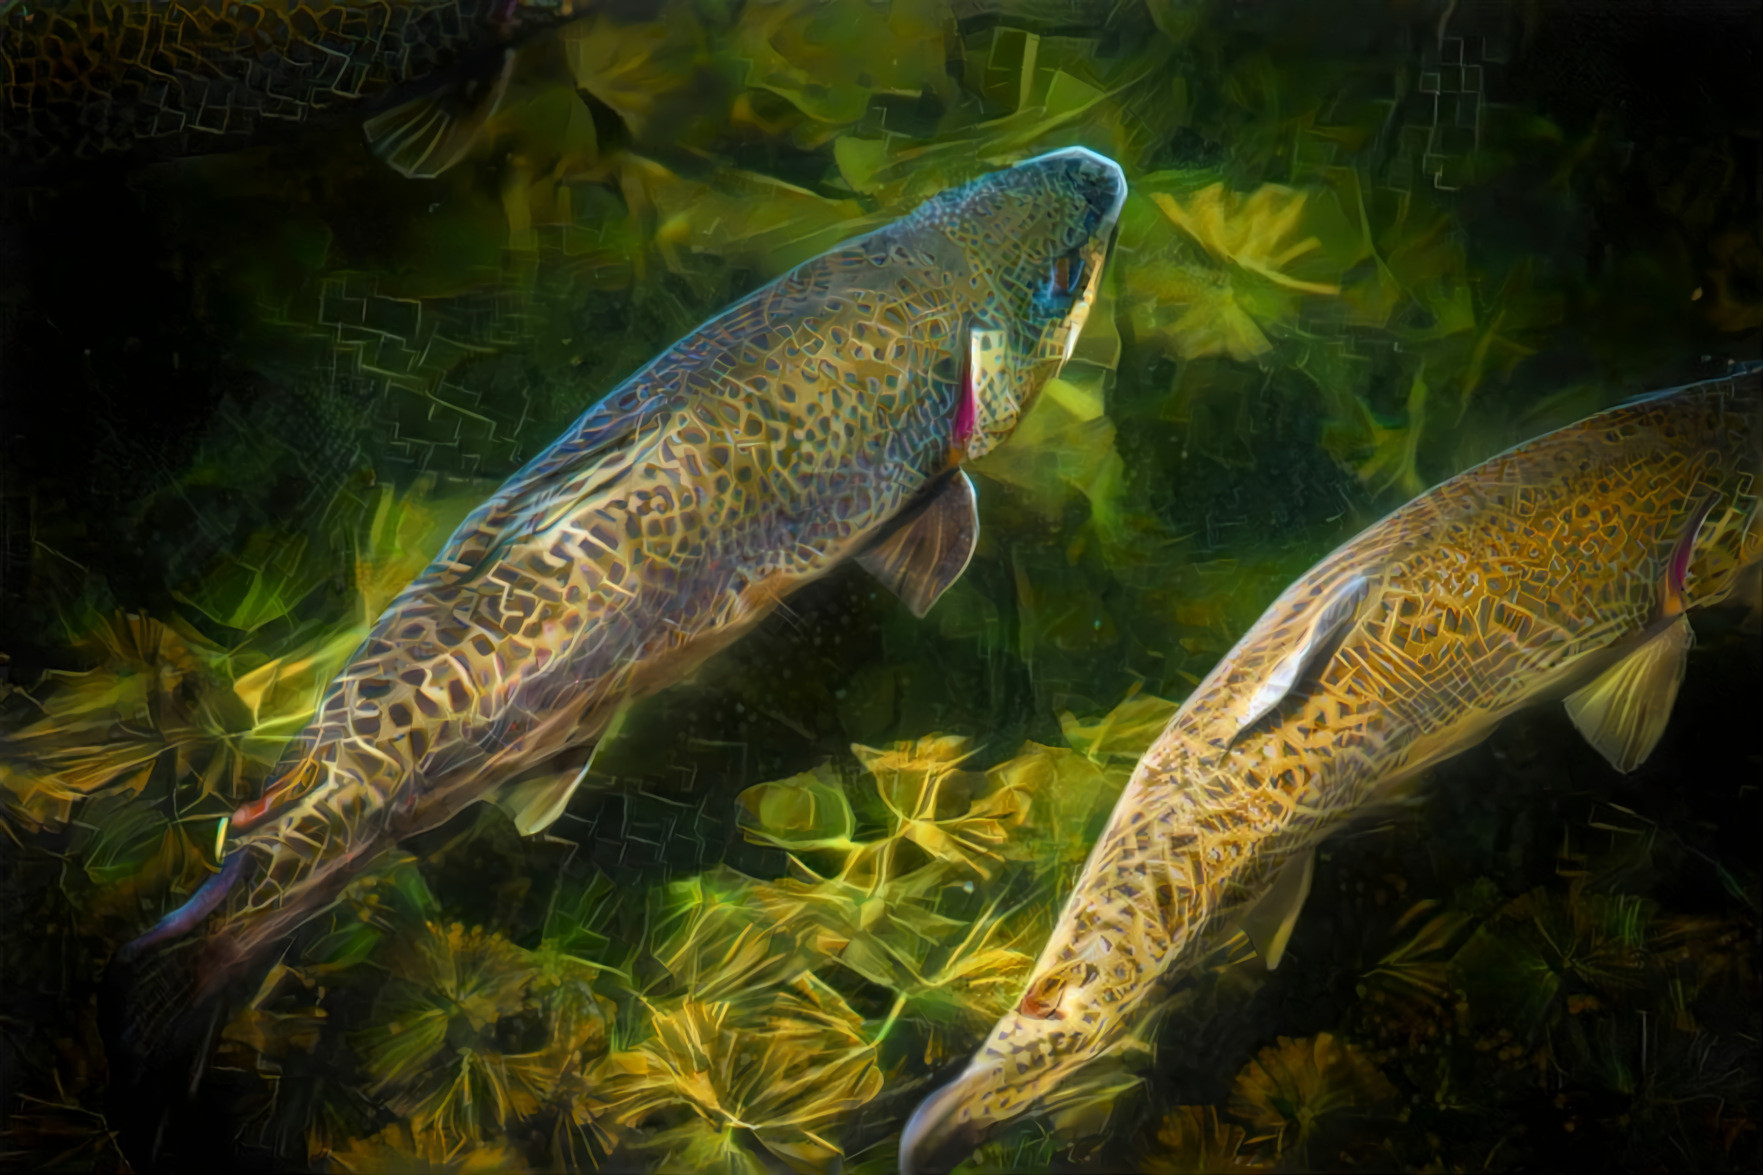 Dreaming of Trout. (I dreamed once of trout swimming in a wooden rain barrel under the eves of the house, where rain spilled from the gutters.) Original photo by Jon Sailer on Unsplash.